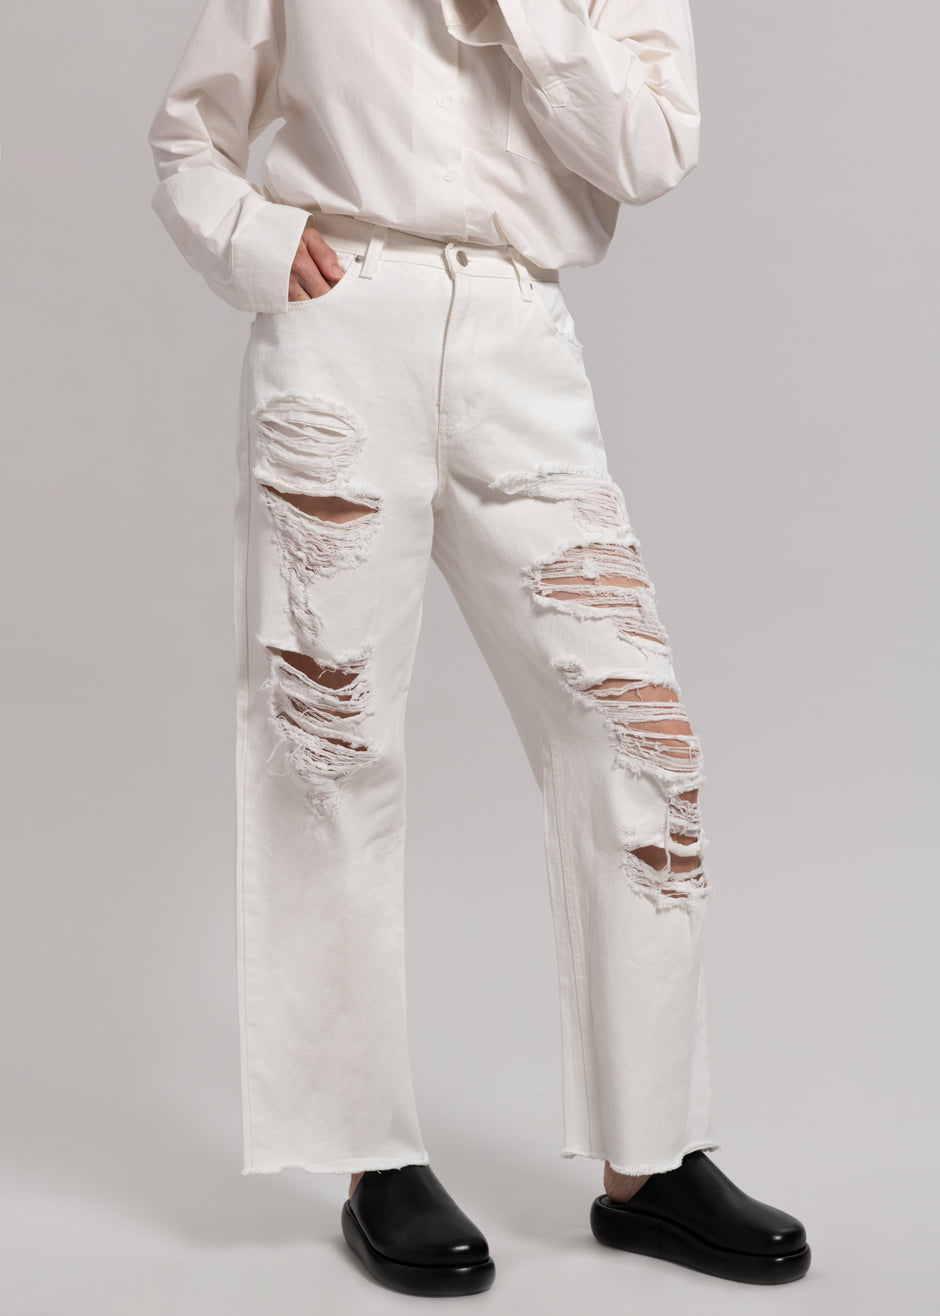 Tory Ripped Jeans - White - 2